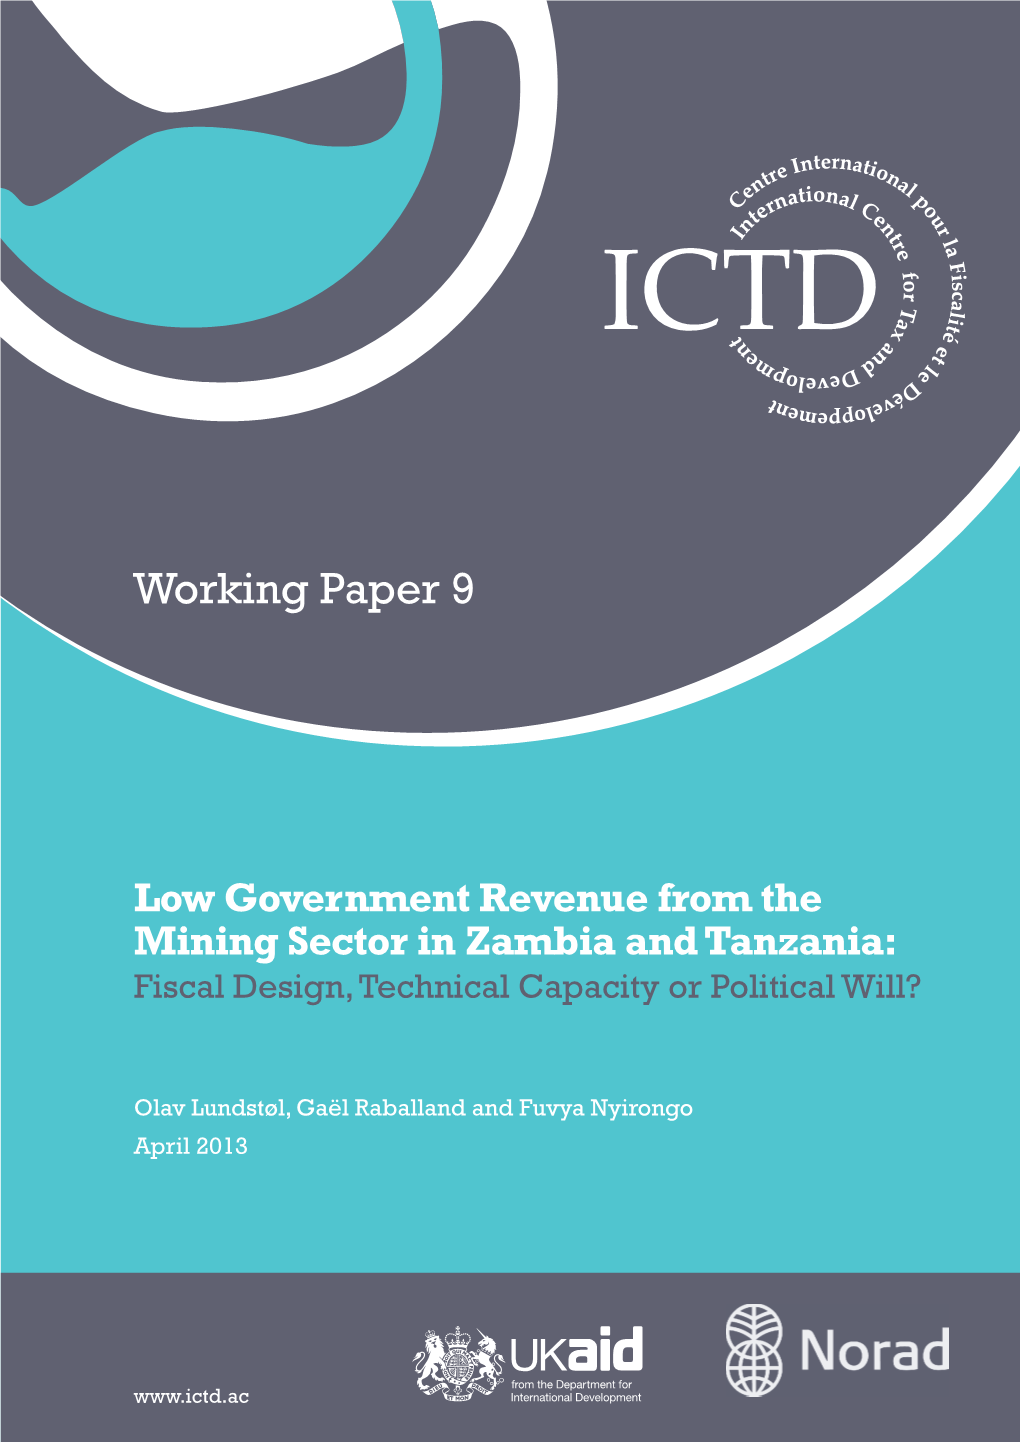 Low Government Revenue from the Mining Sector in Zambia and Tanzania: Fiscal Design, Technical Capacity Or Political Will?